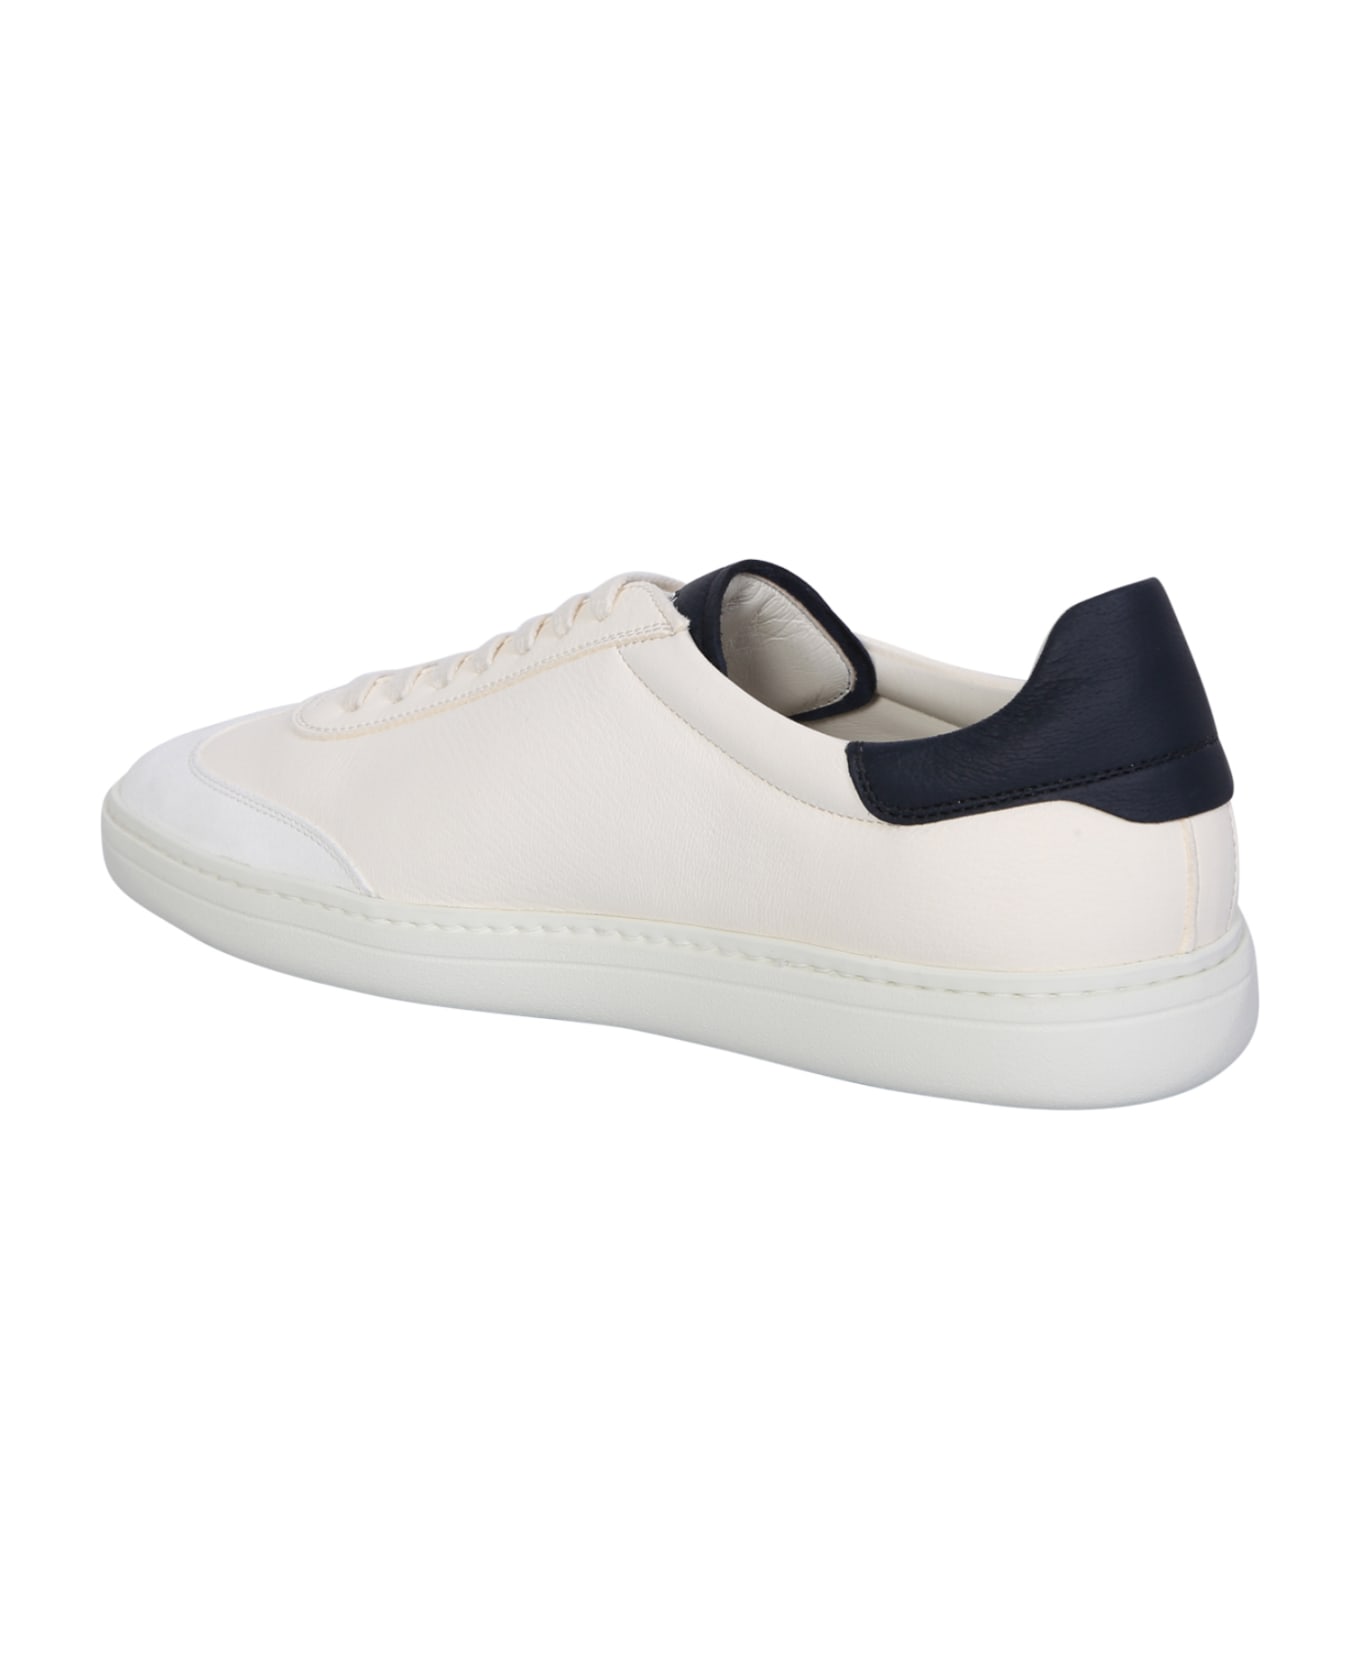 Church's Ivory Boland 2 Sneakers - White